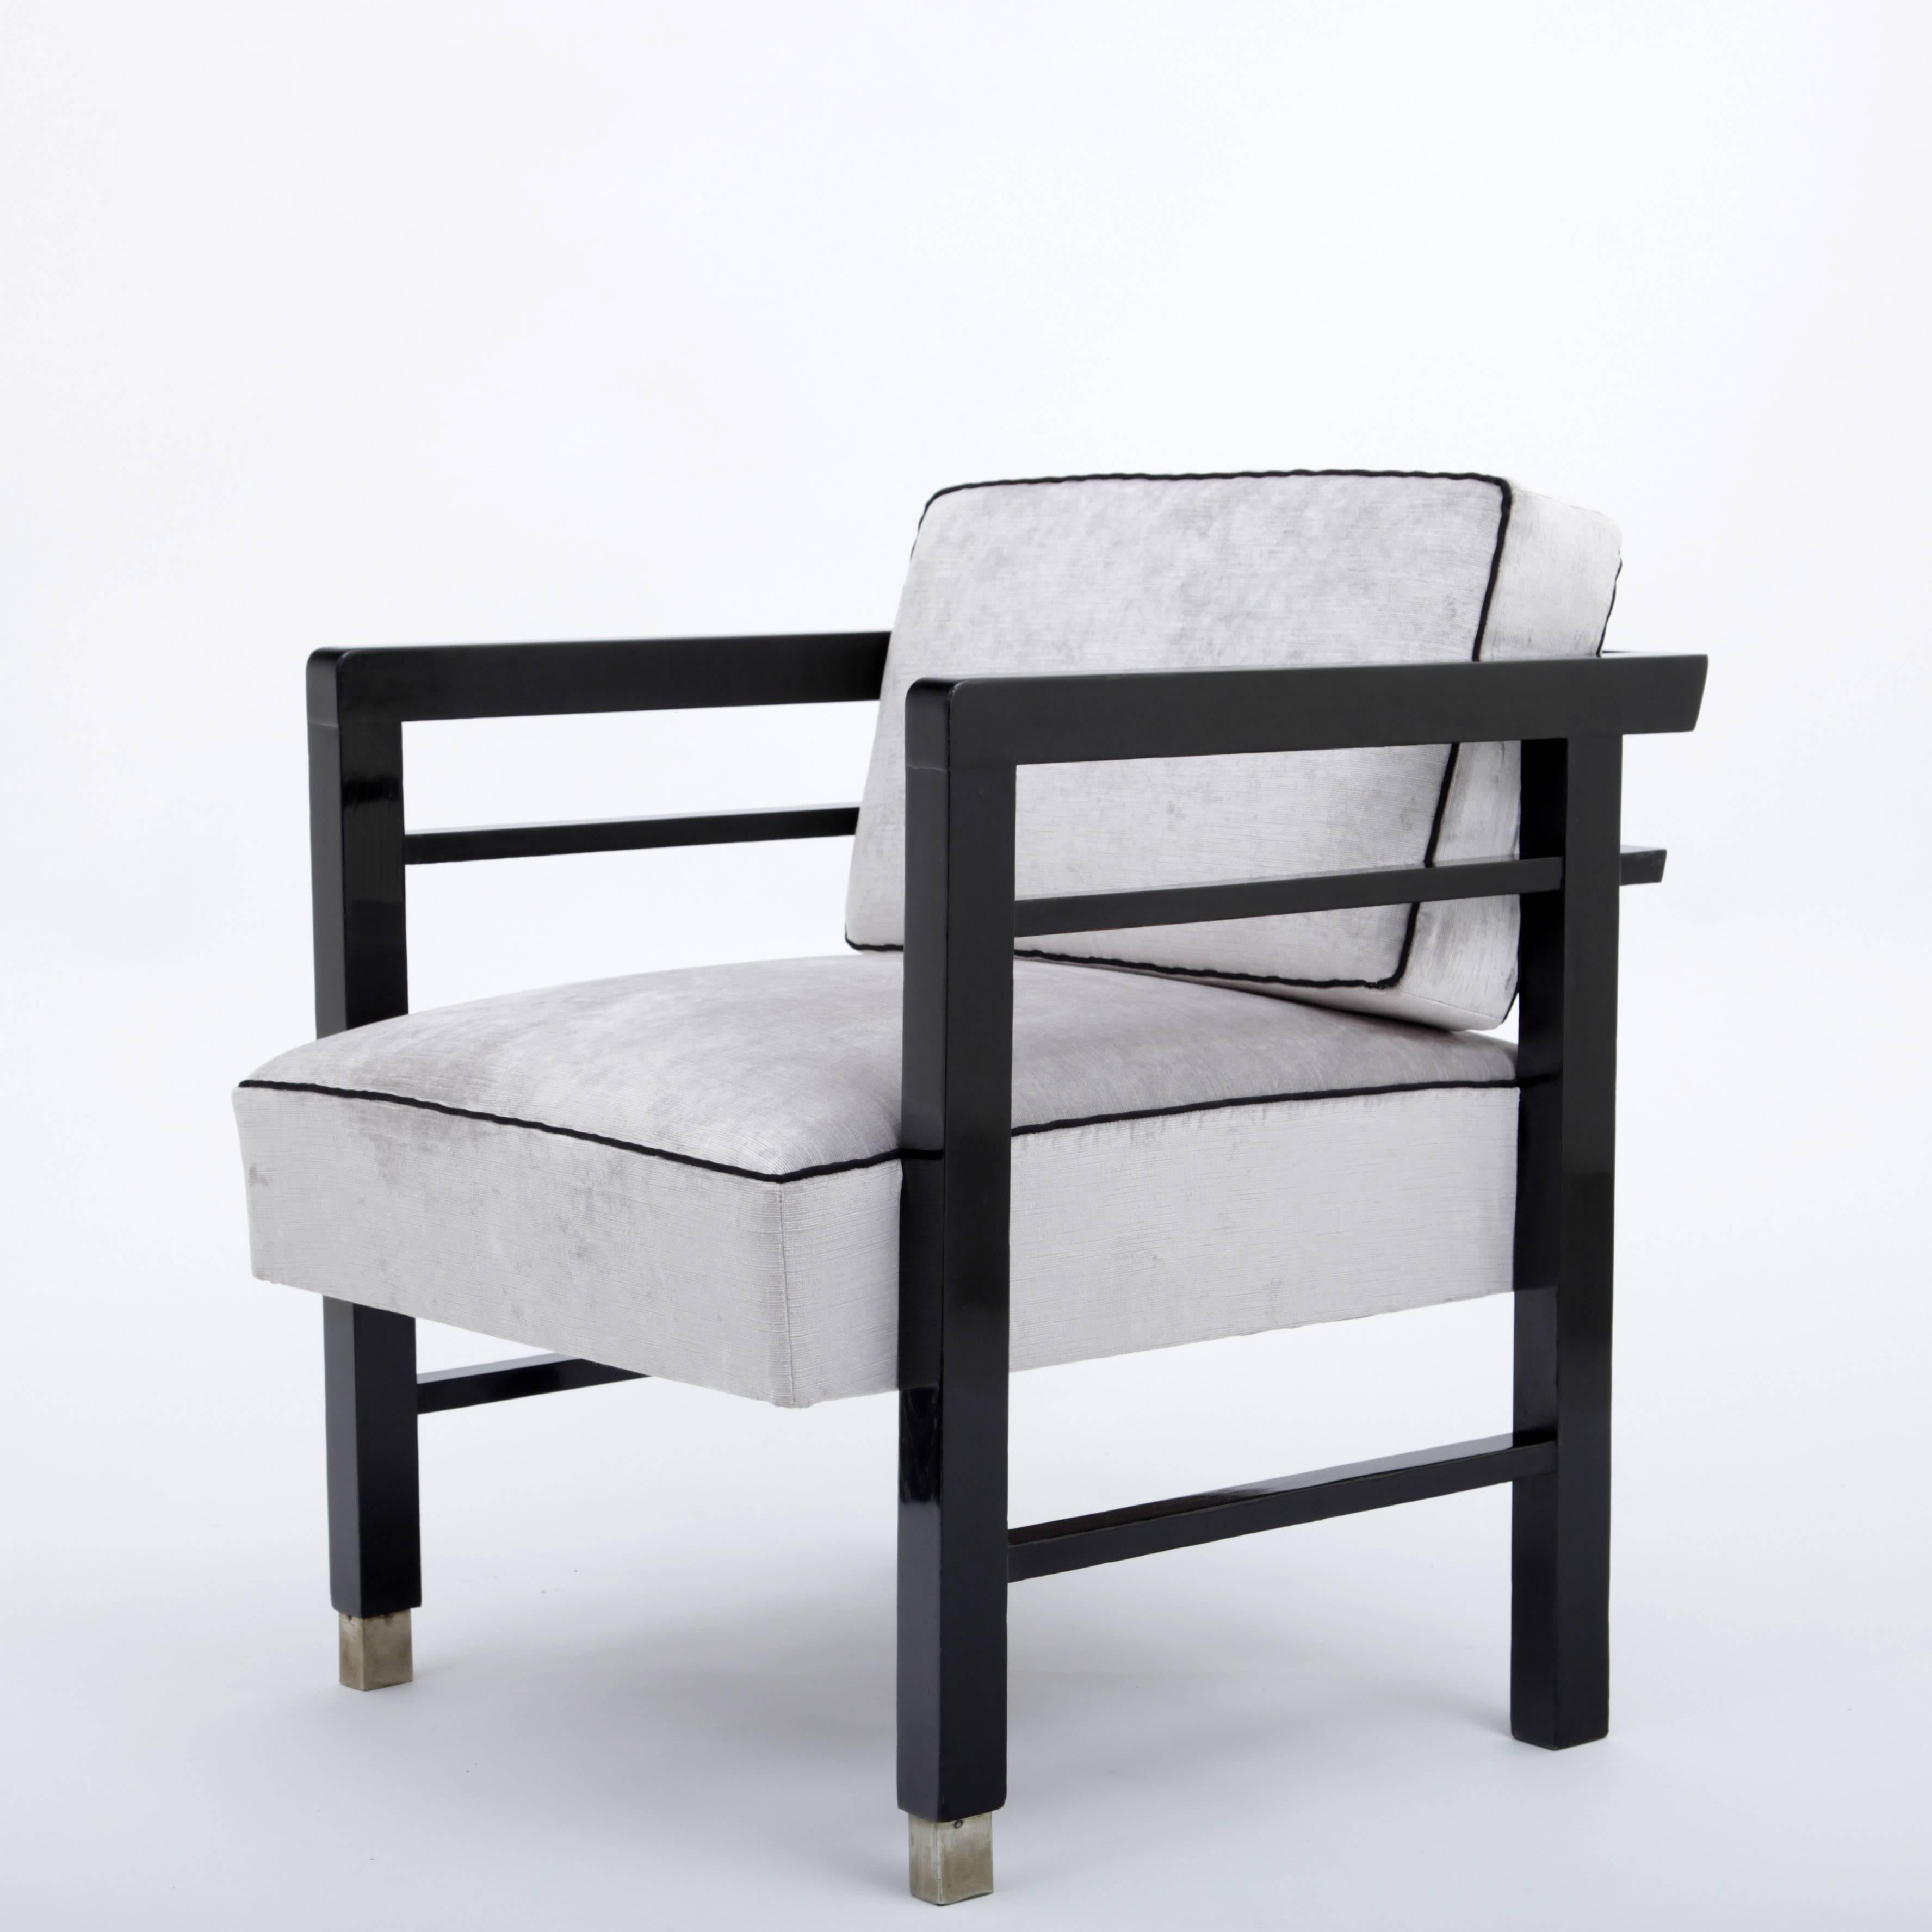 Armchair in a rectangular minimalistic shape, with ebonized frame on brass sabots. The style is derivative of De Stijl.
Plaque on the back: 